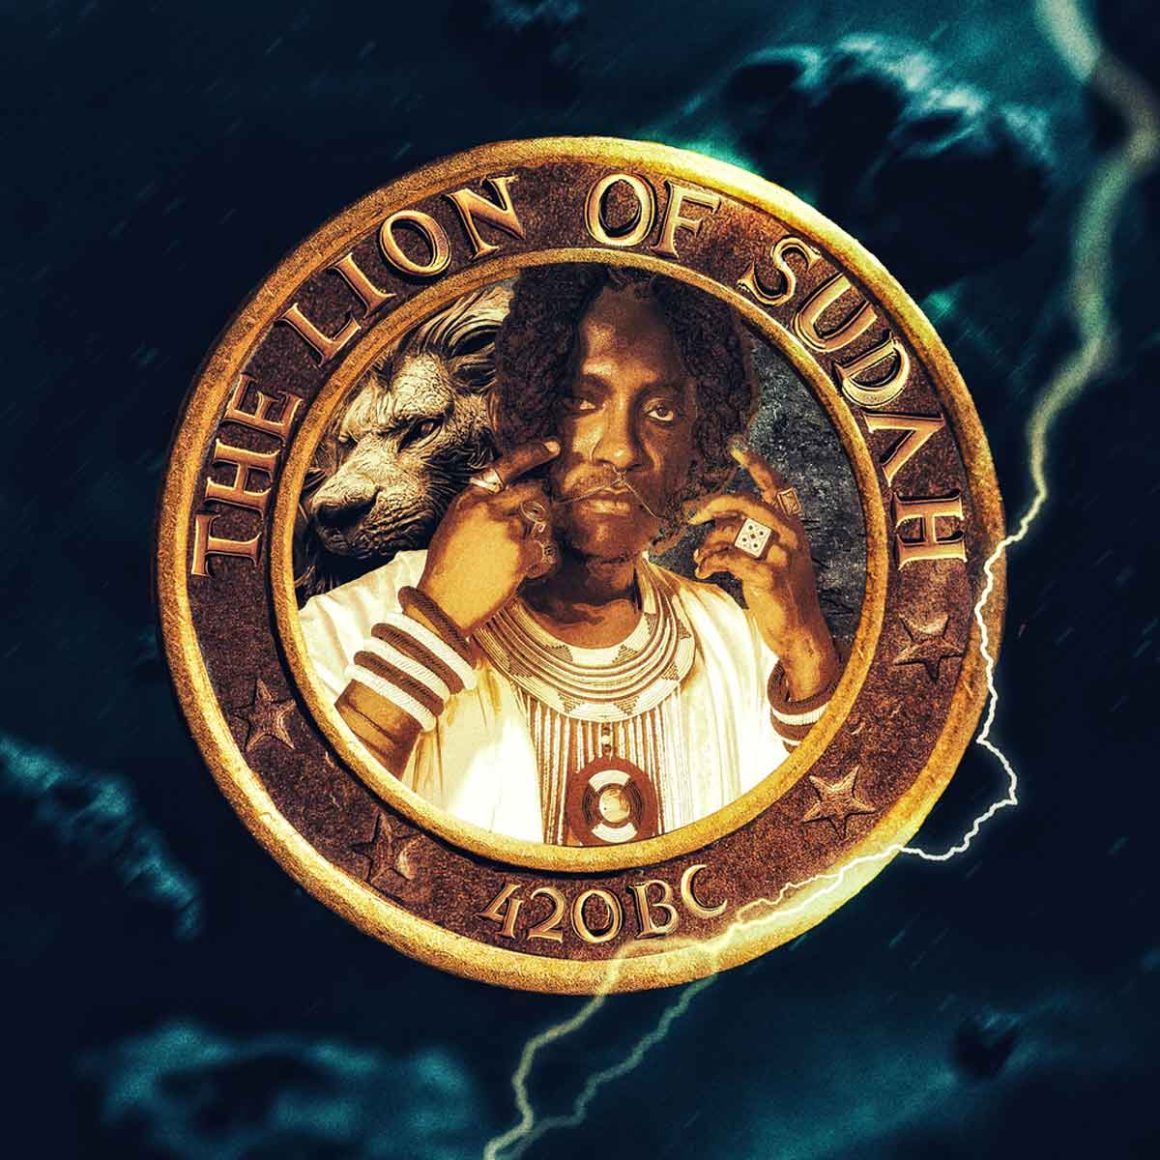 Album cover for Kenyan artist Bensoul's debut album titled 'The Lion of Sudah'. The album has 15 tracks and features several Kenyan artists such as Bien, Muthaka, Xenia Manasseh, Savara, and others. The album was released on April 20, 2023. Some of the songs in the album appear on the list of top 25 Kenyan songs released in April 2023. | Image: Bensoul